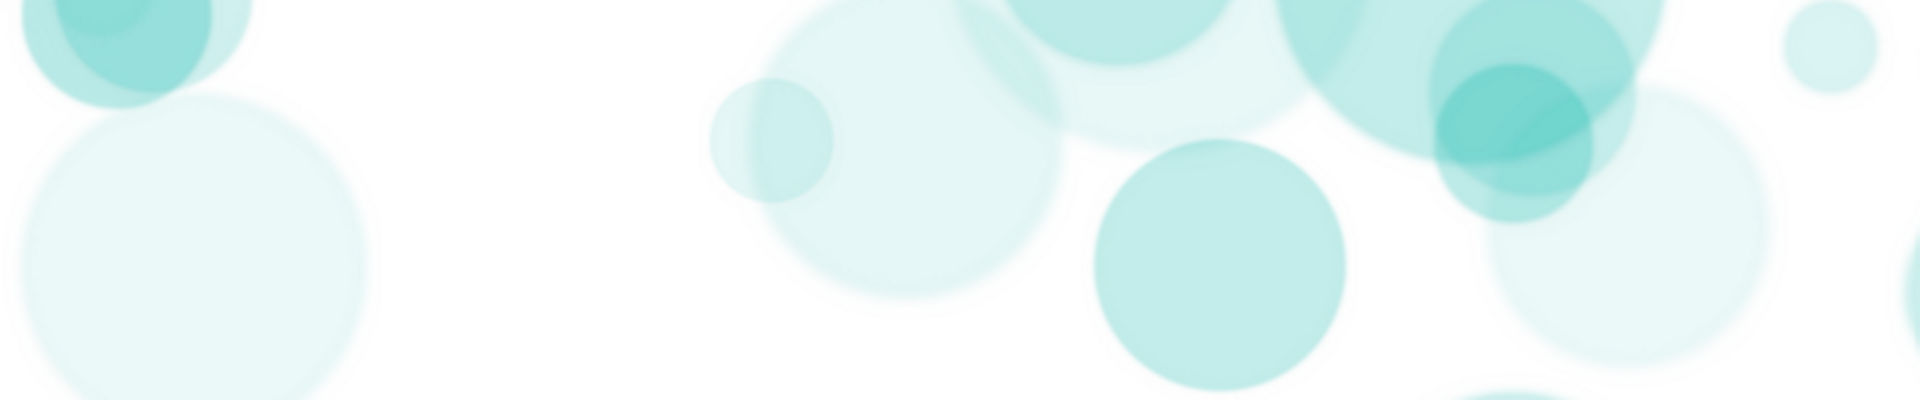 Blue and teal bubble floating on a white background